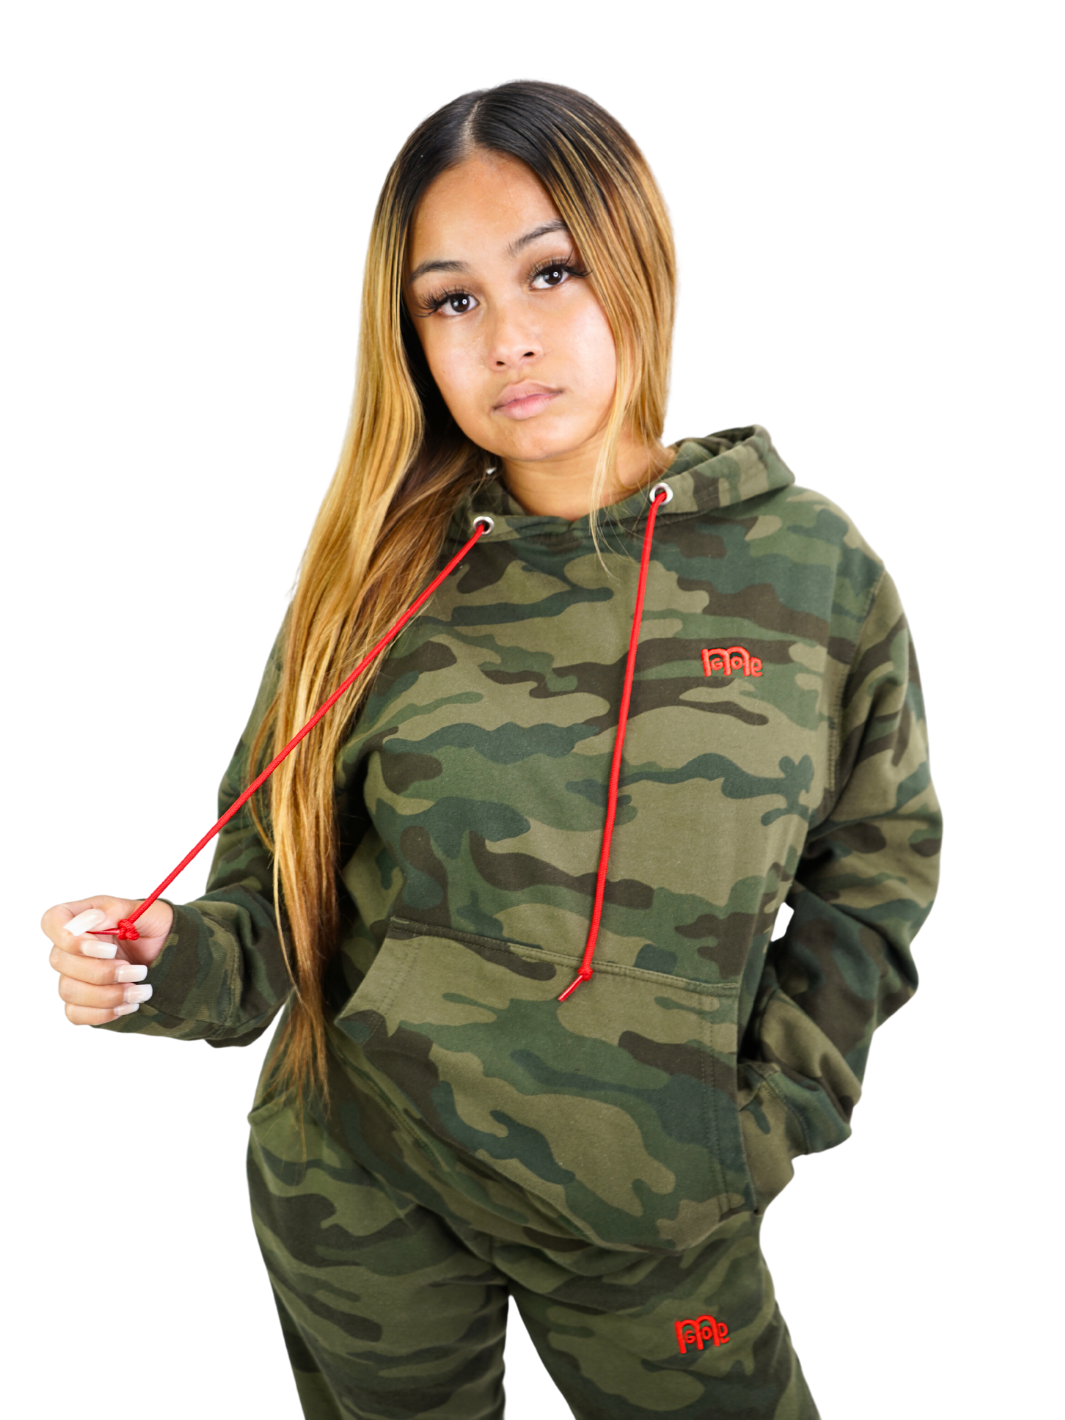 Green Camouflage Pullover Hoodie with Red drawcord, embroidered GODinme logo at left chest and ROMANS 12 : 21 on hood. Both embroideries are in Red.